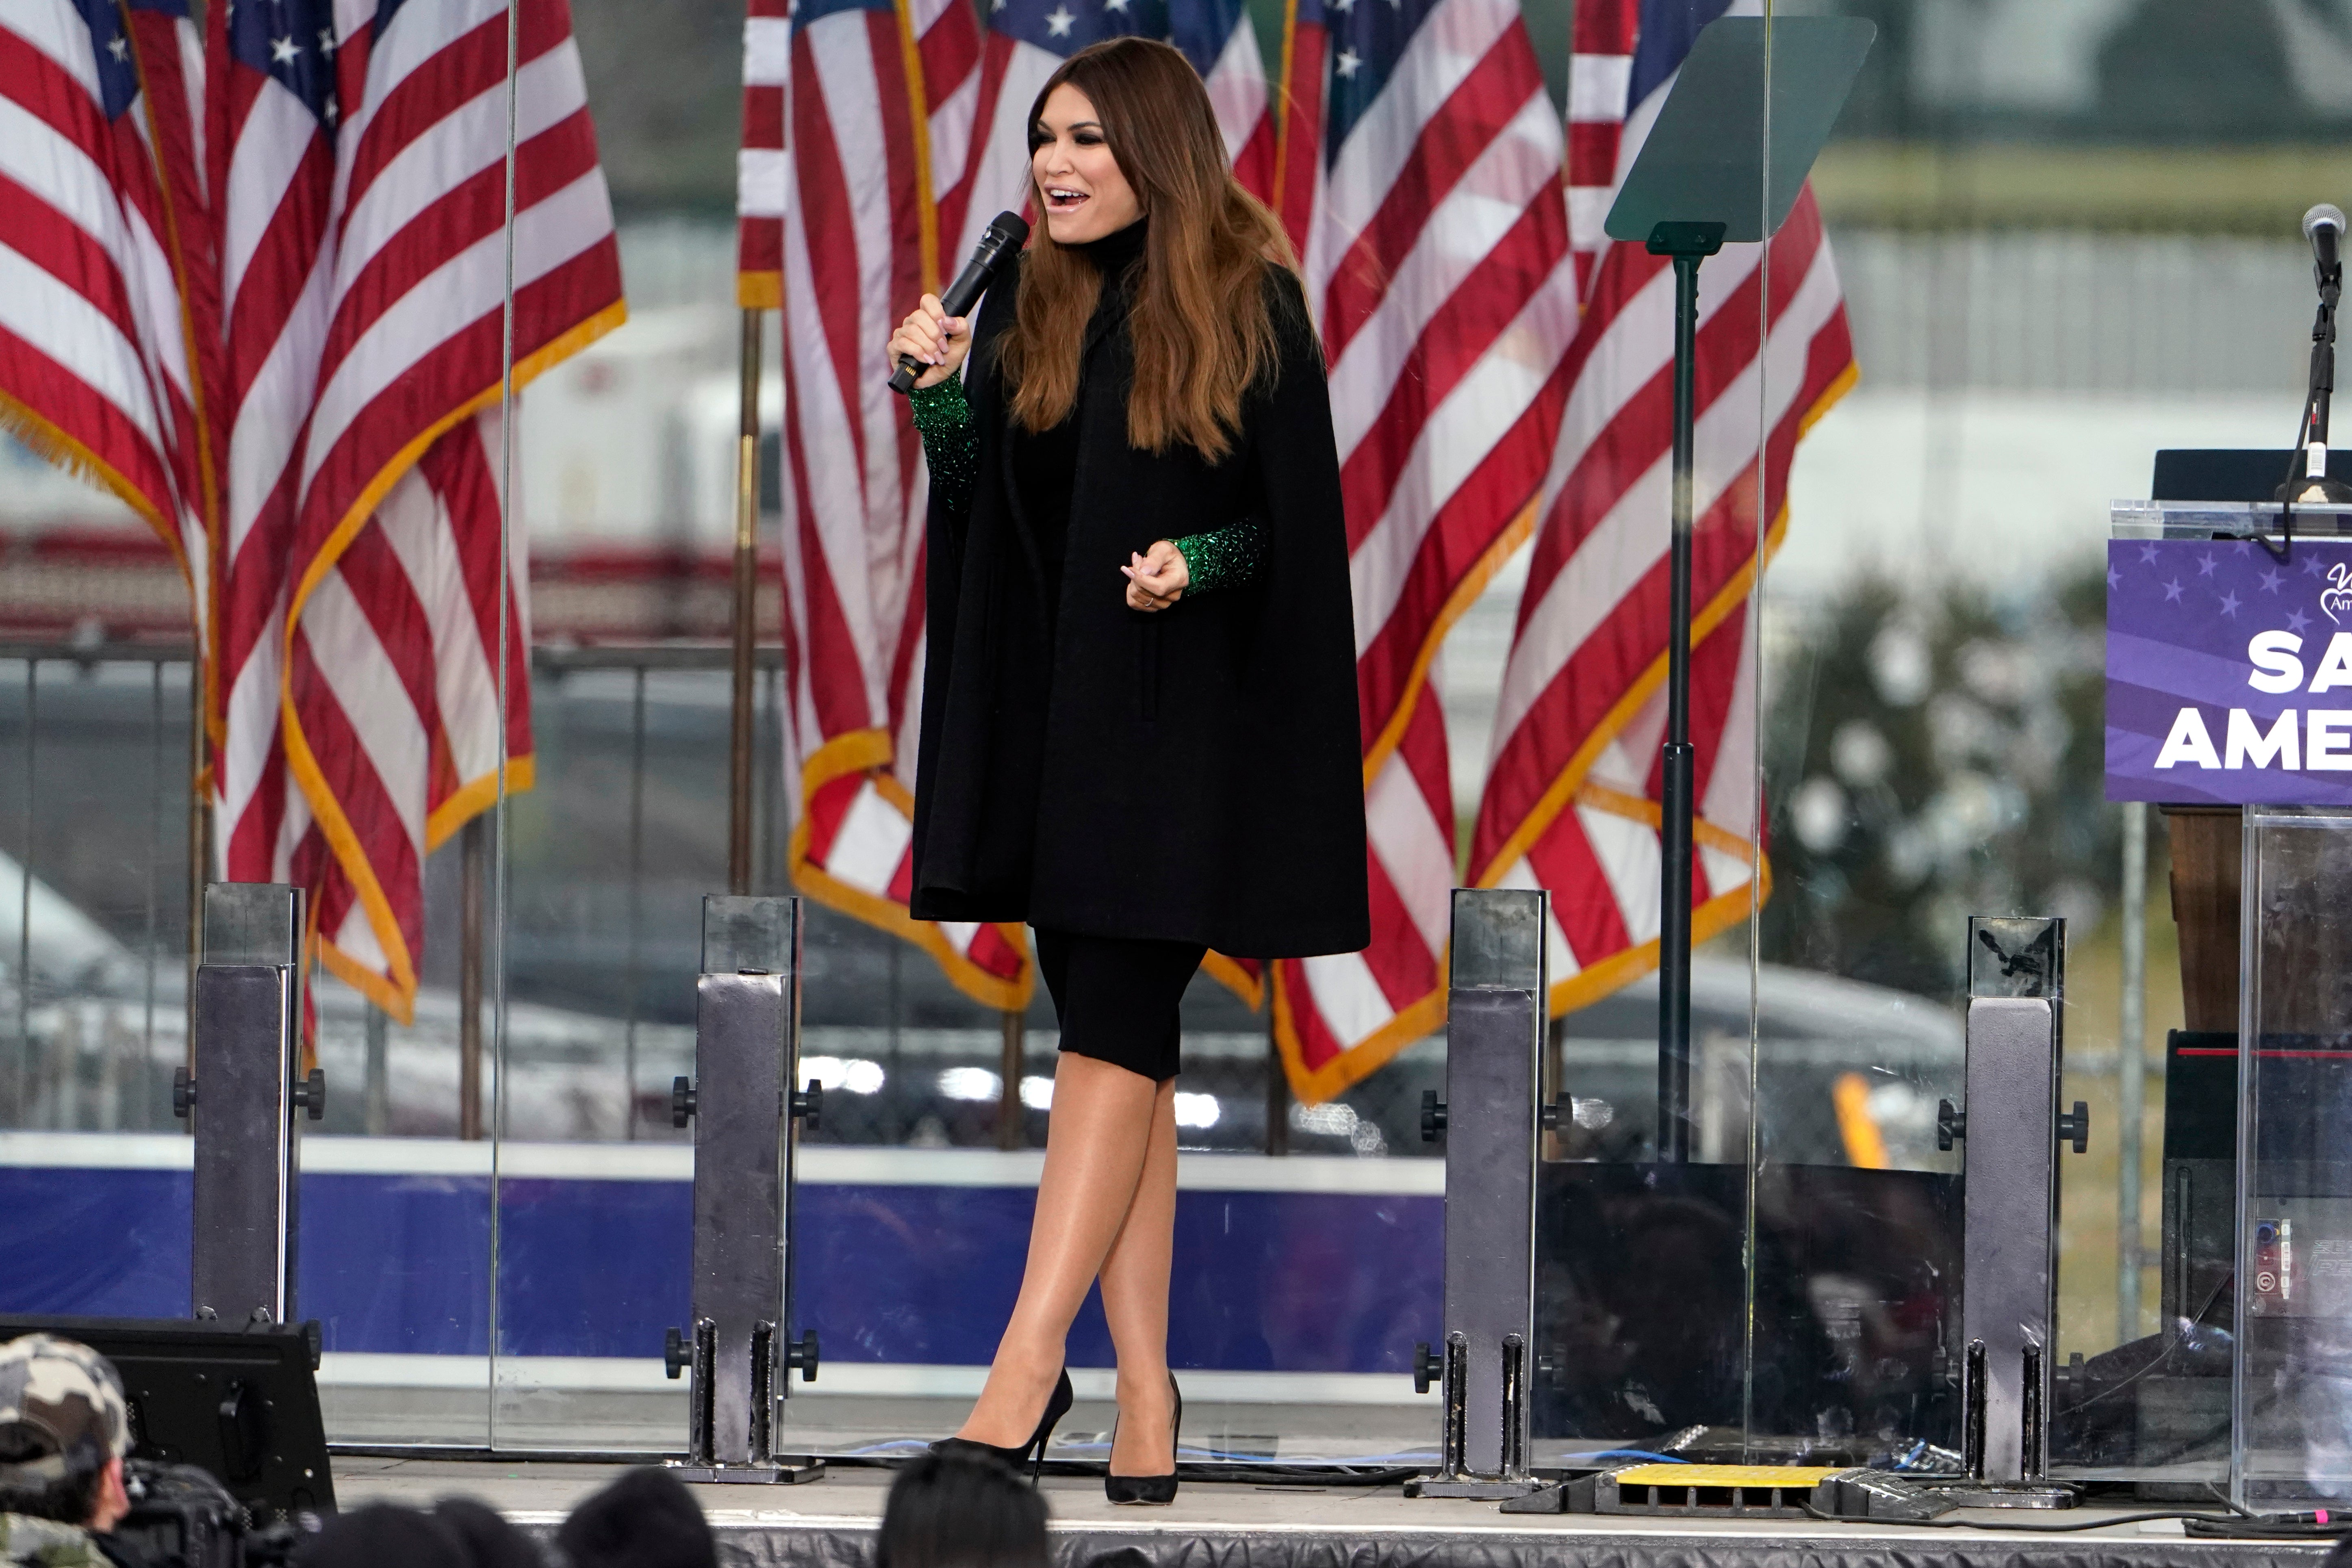 Kimberly Guilfoyle, the fiancée of former President Donald Trump´s eldest son, met with the House committee investigating the U.S. Capitol insurrection Monday